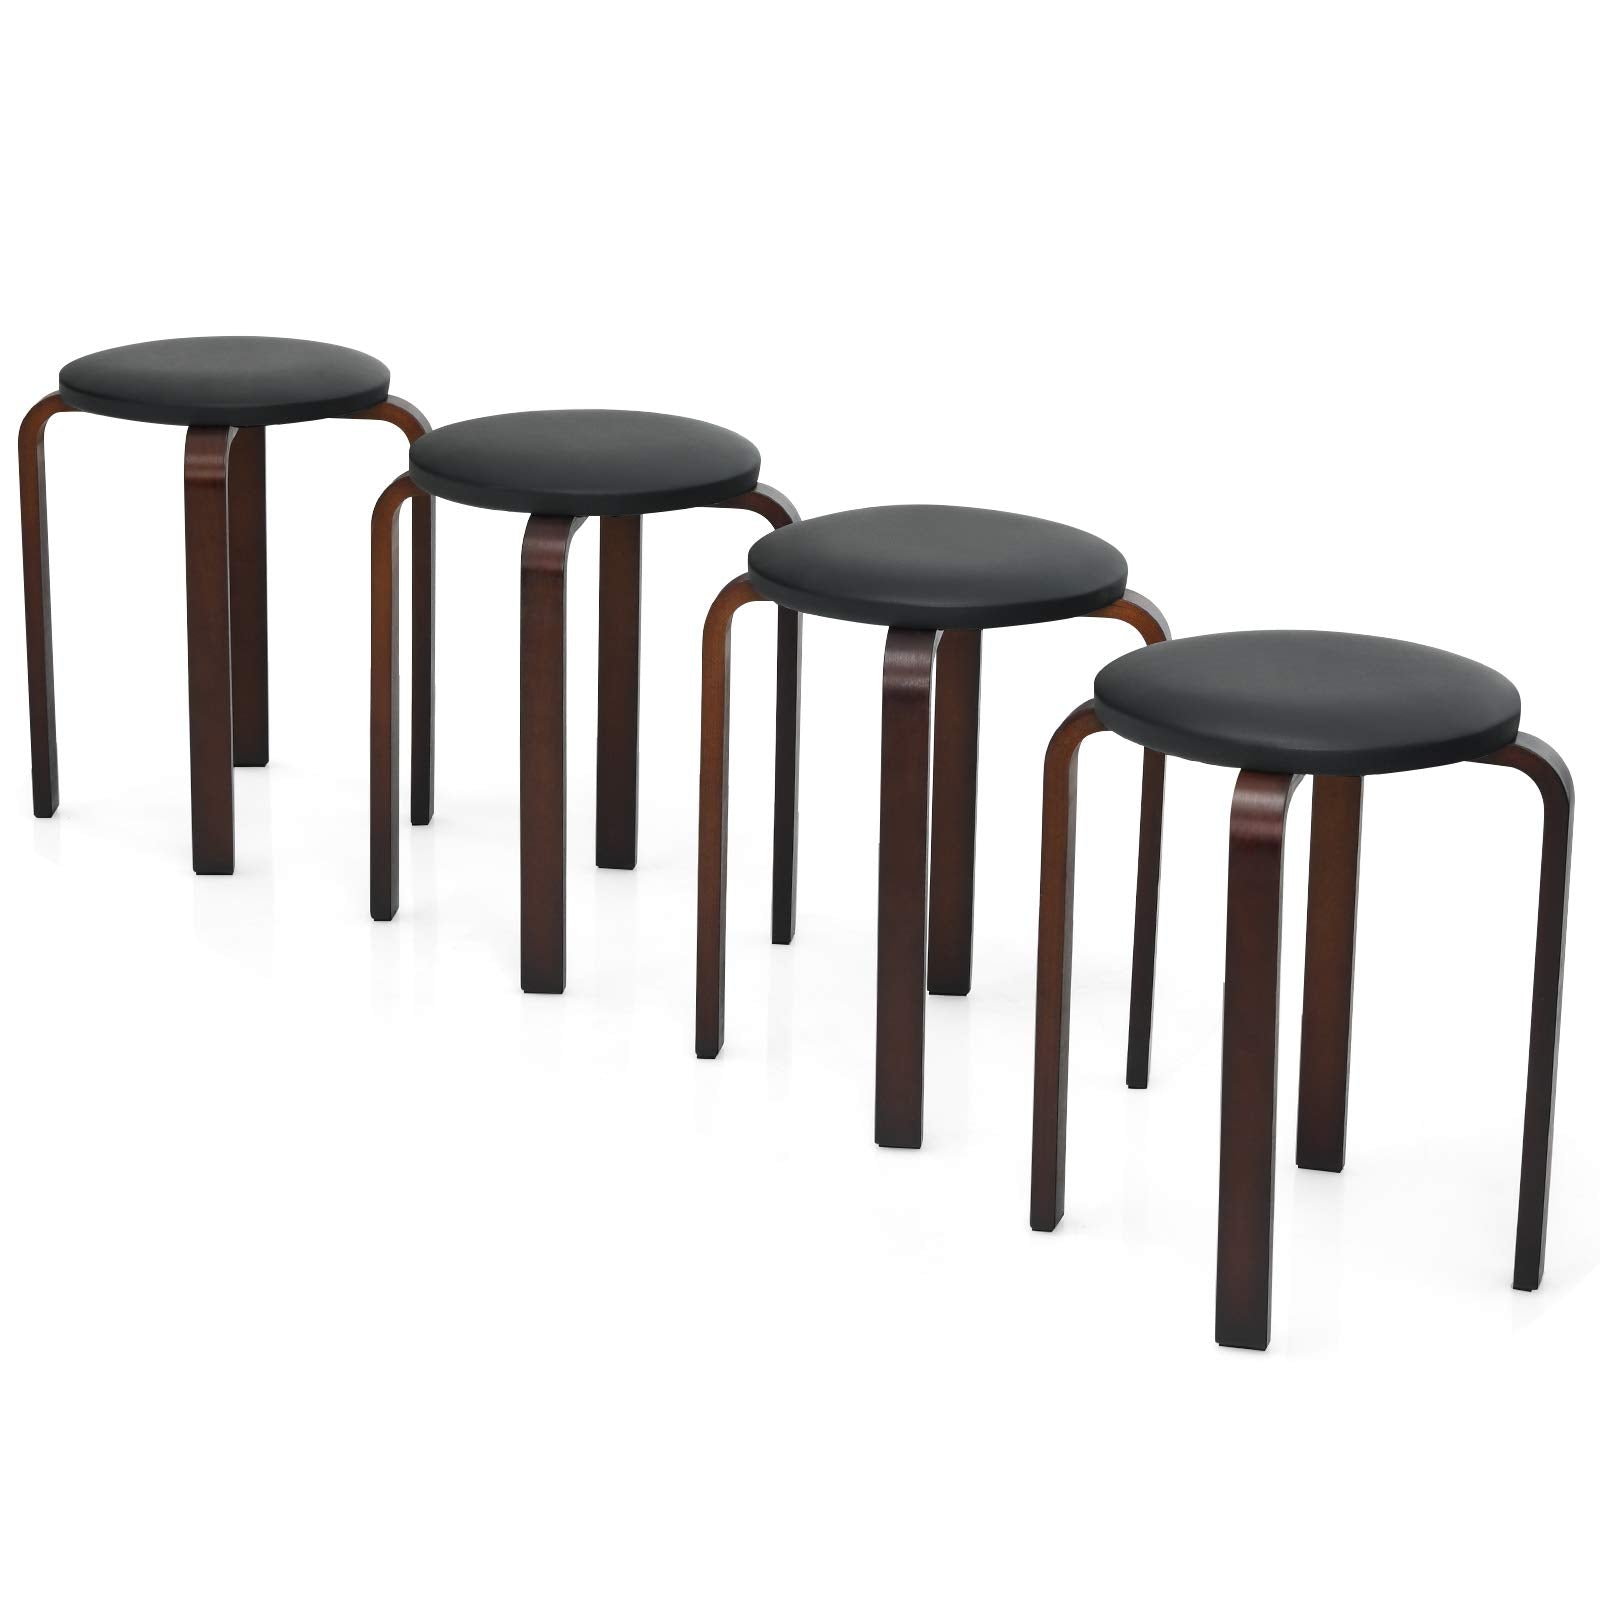 4-Pack Bentwood Stack Stools, 18.5-Inch Portable Stools with PU Leather Round Top, Non-Slip Foot Mats